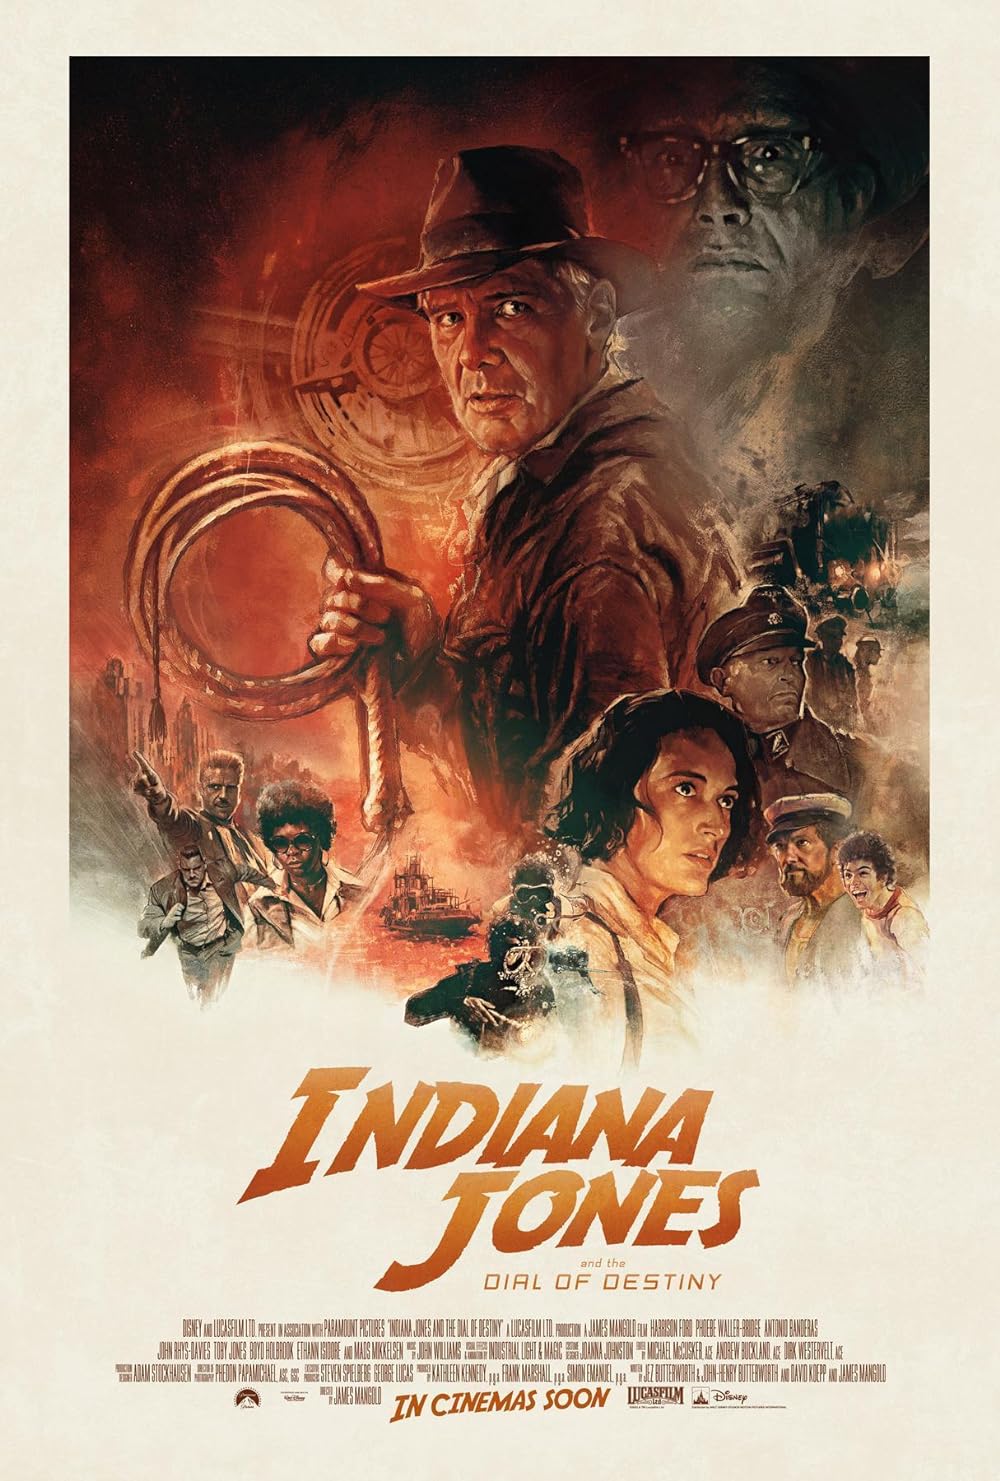 Cover Art for "Indiana Jones and the Dial of Destiny"